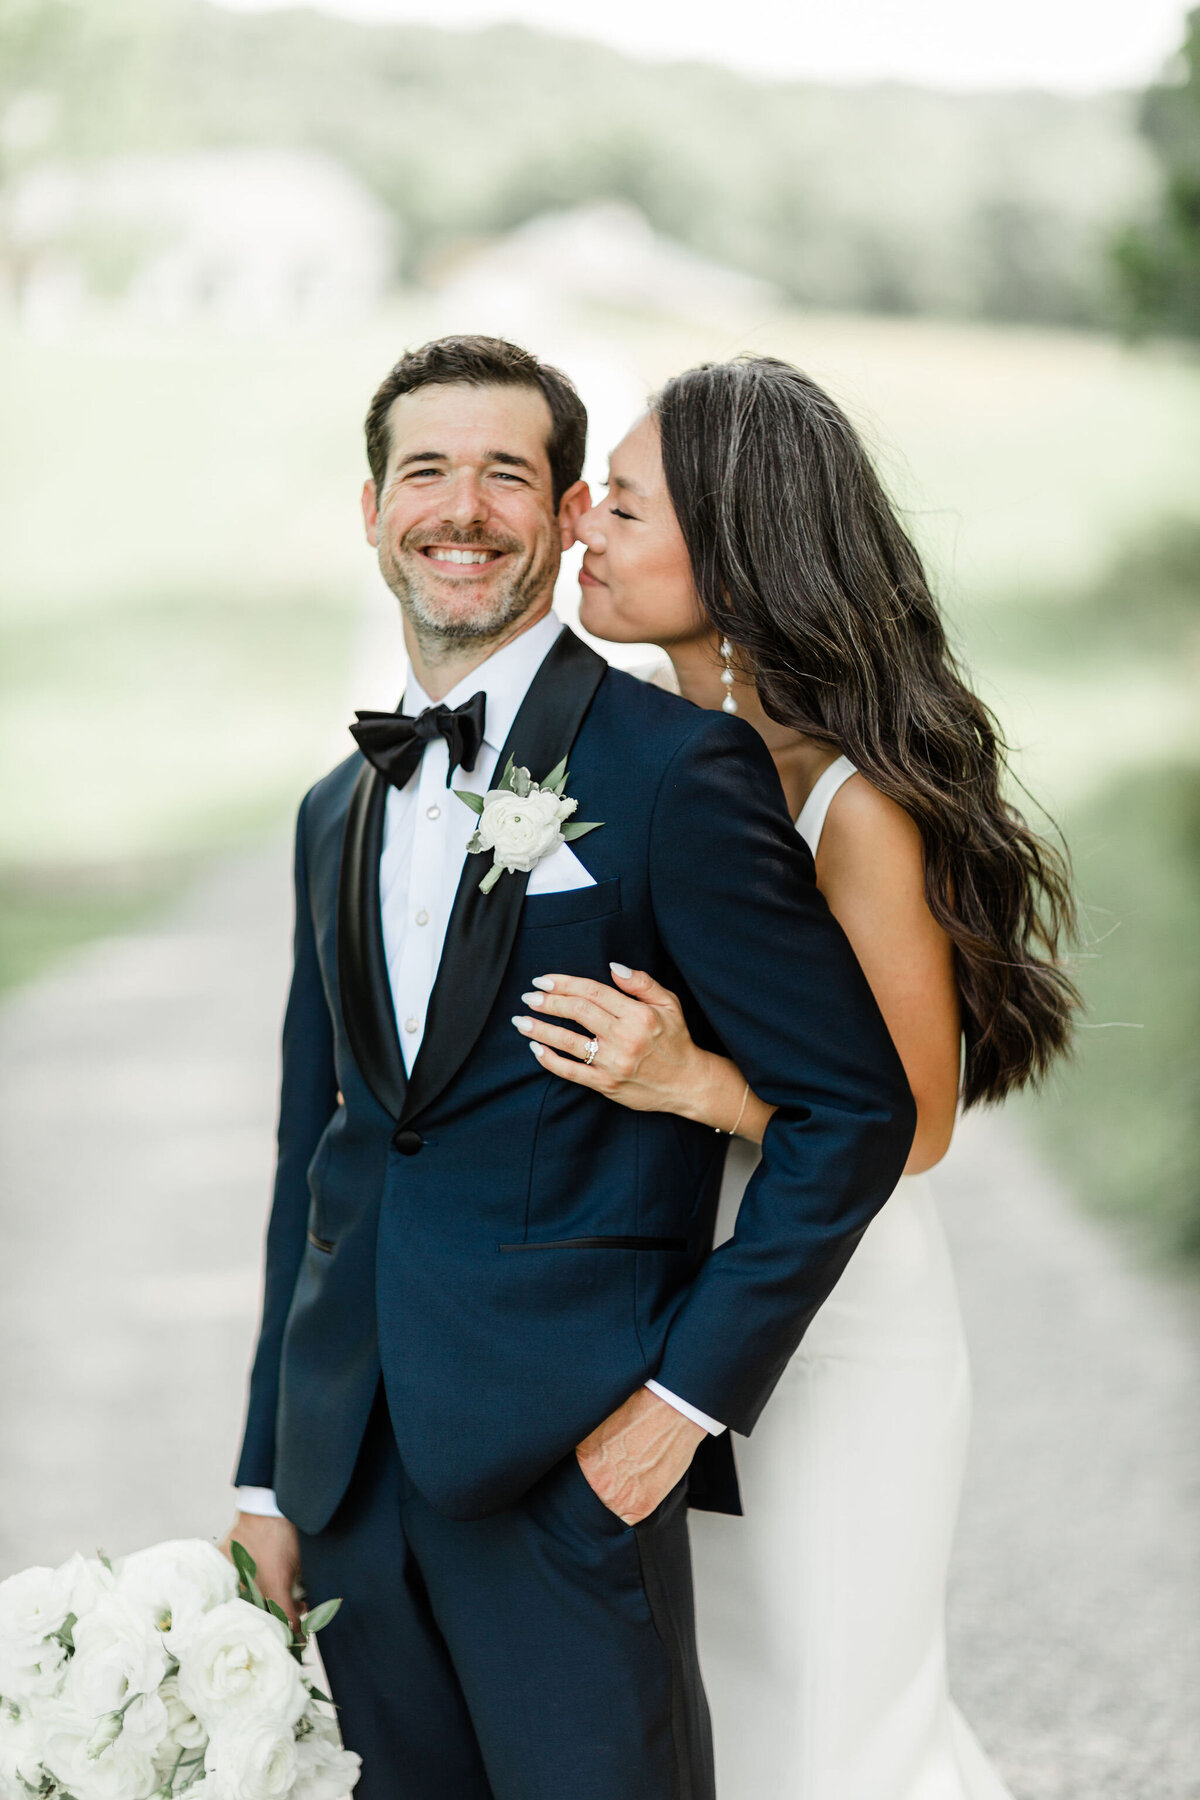 Sometimes a simple pose brings out the best photos for these two newlyweds!